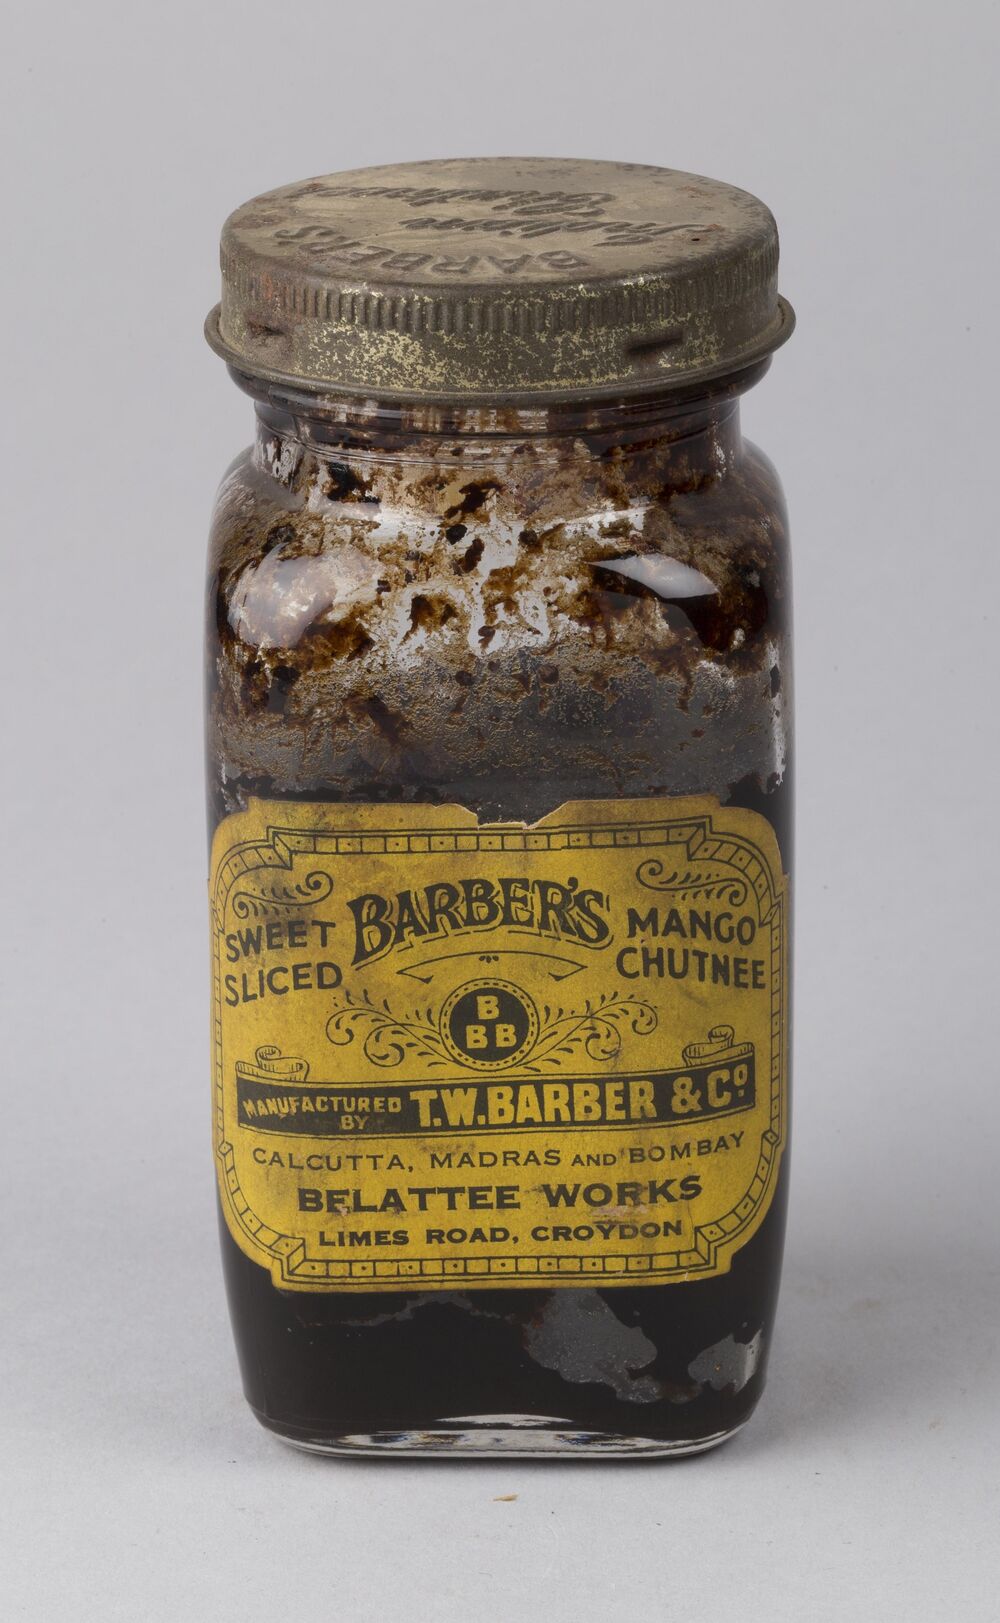 A very old glass jar, with a metal screw lid, is displayed against a plain grey background. Chutney can be seen smeared inside. A bright yellow label on the front says: Sweet sliced Barber's Mango chutnee. Manufactured by T W Barber & Co. Calcutta, Madras and Bombay. Belattee Works, Limes Road, Croydon.